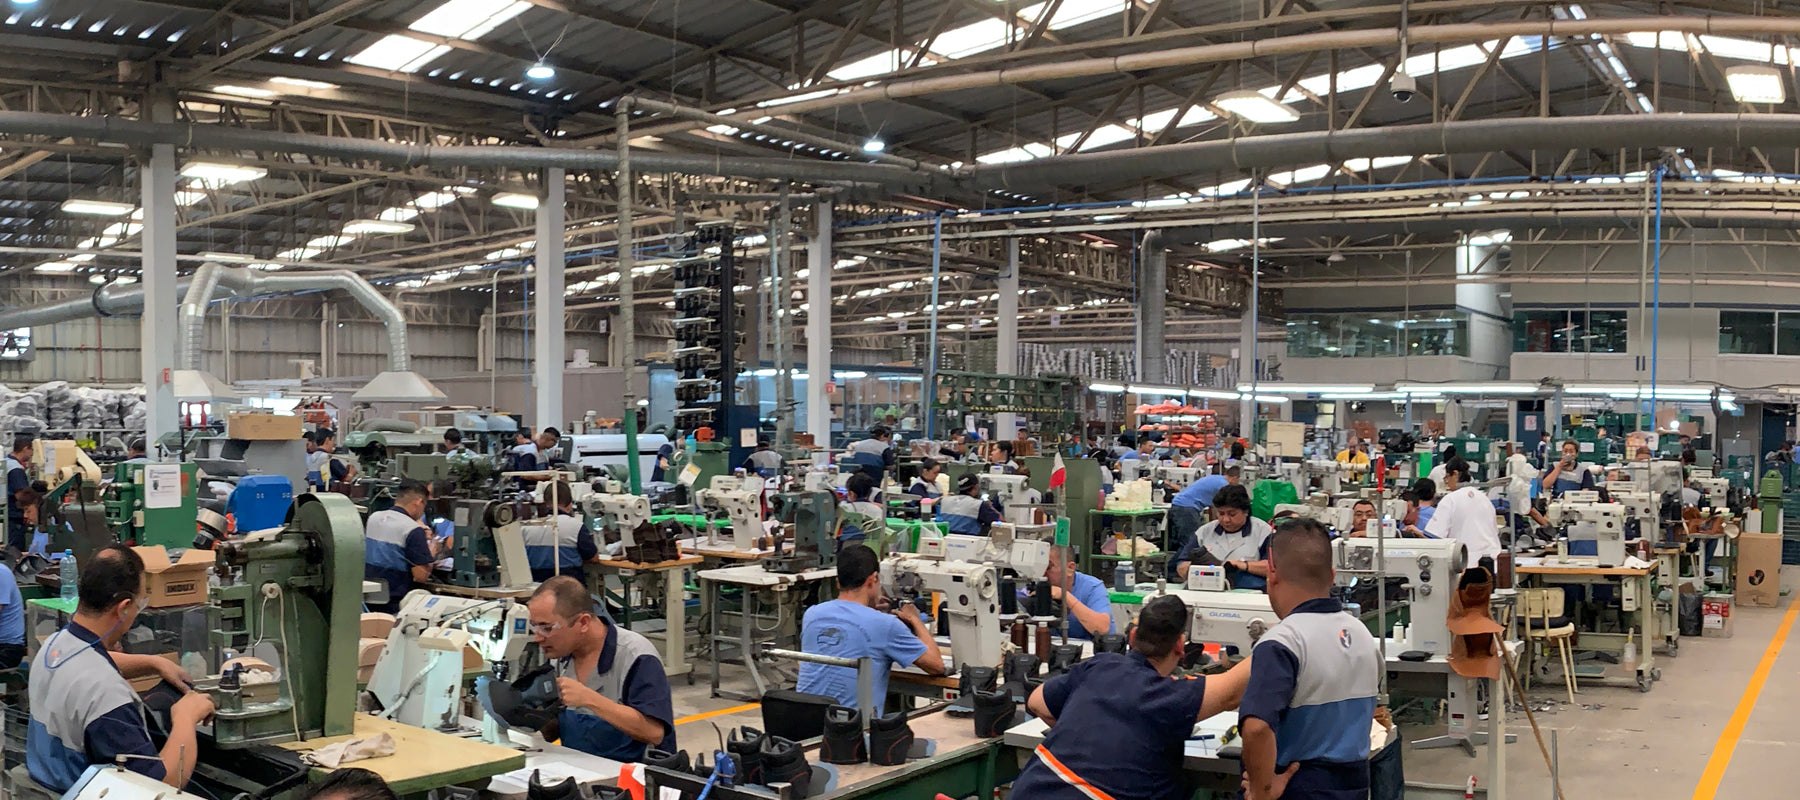 Men and women assembling work boots in Leon, Mexico 